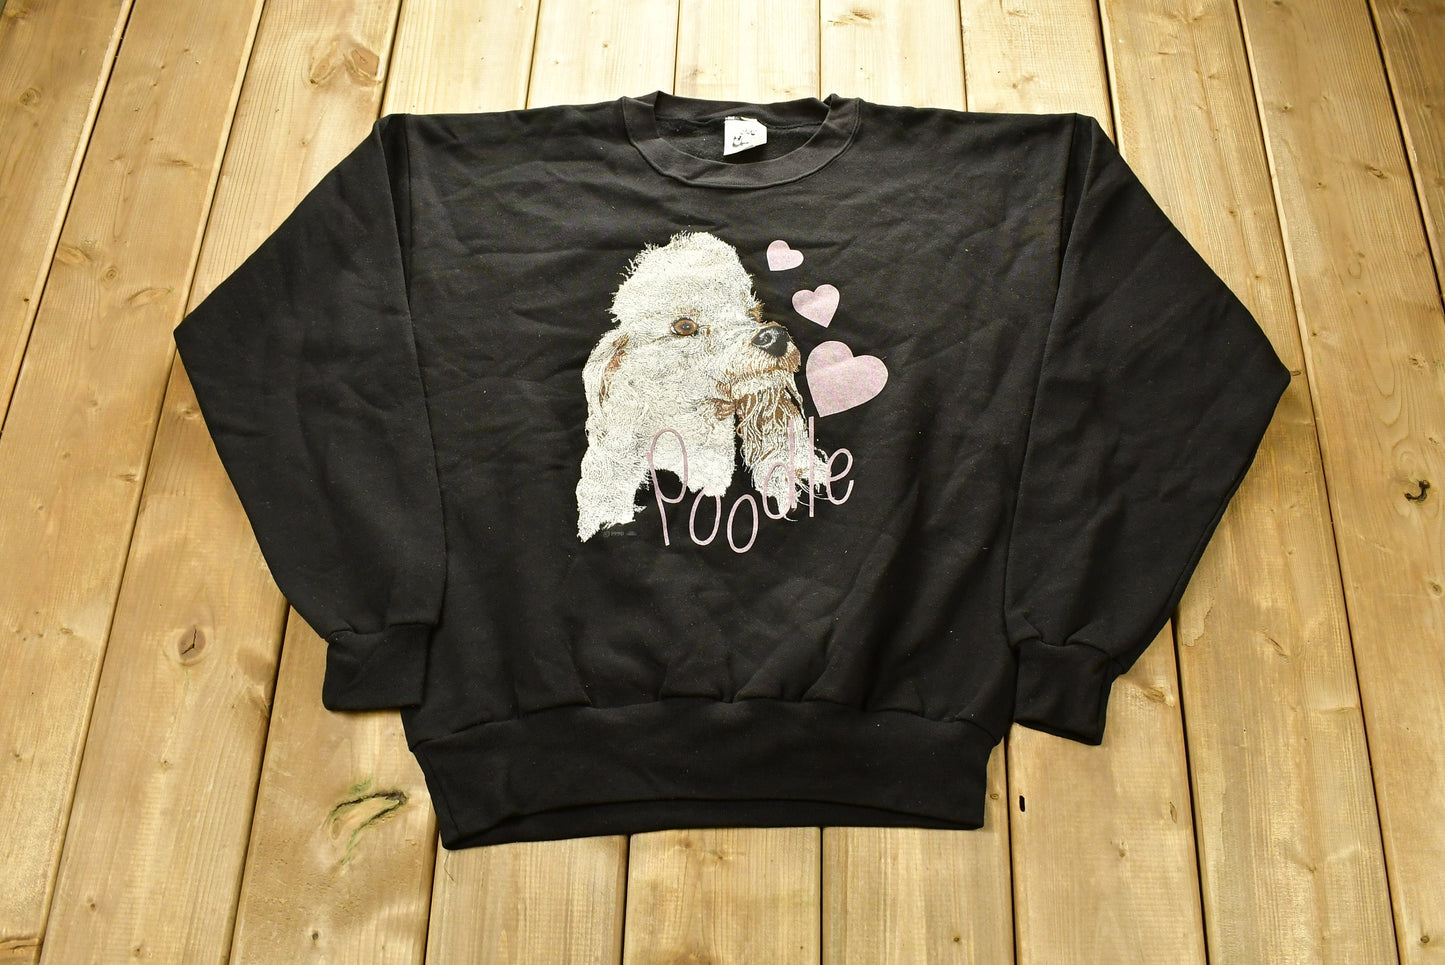 Vintage 1990 Poodle Graphic Crewneck / Made In USA / Vintage Sweatshirt / Animal Print / Cute Sweater / Made In USA / Cute Dog Sweater